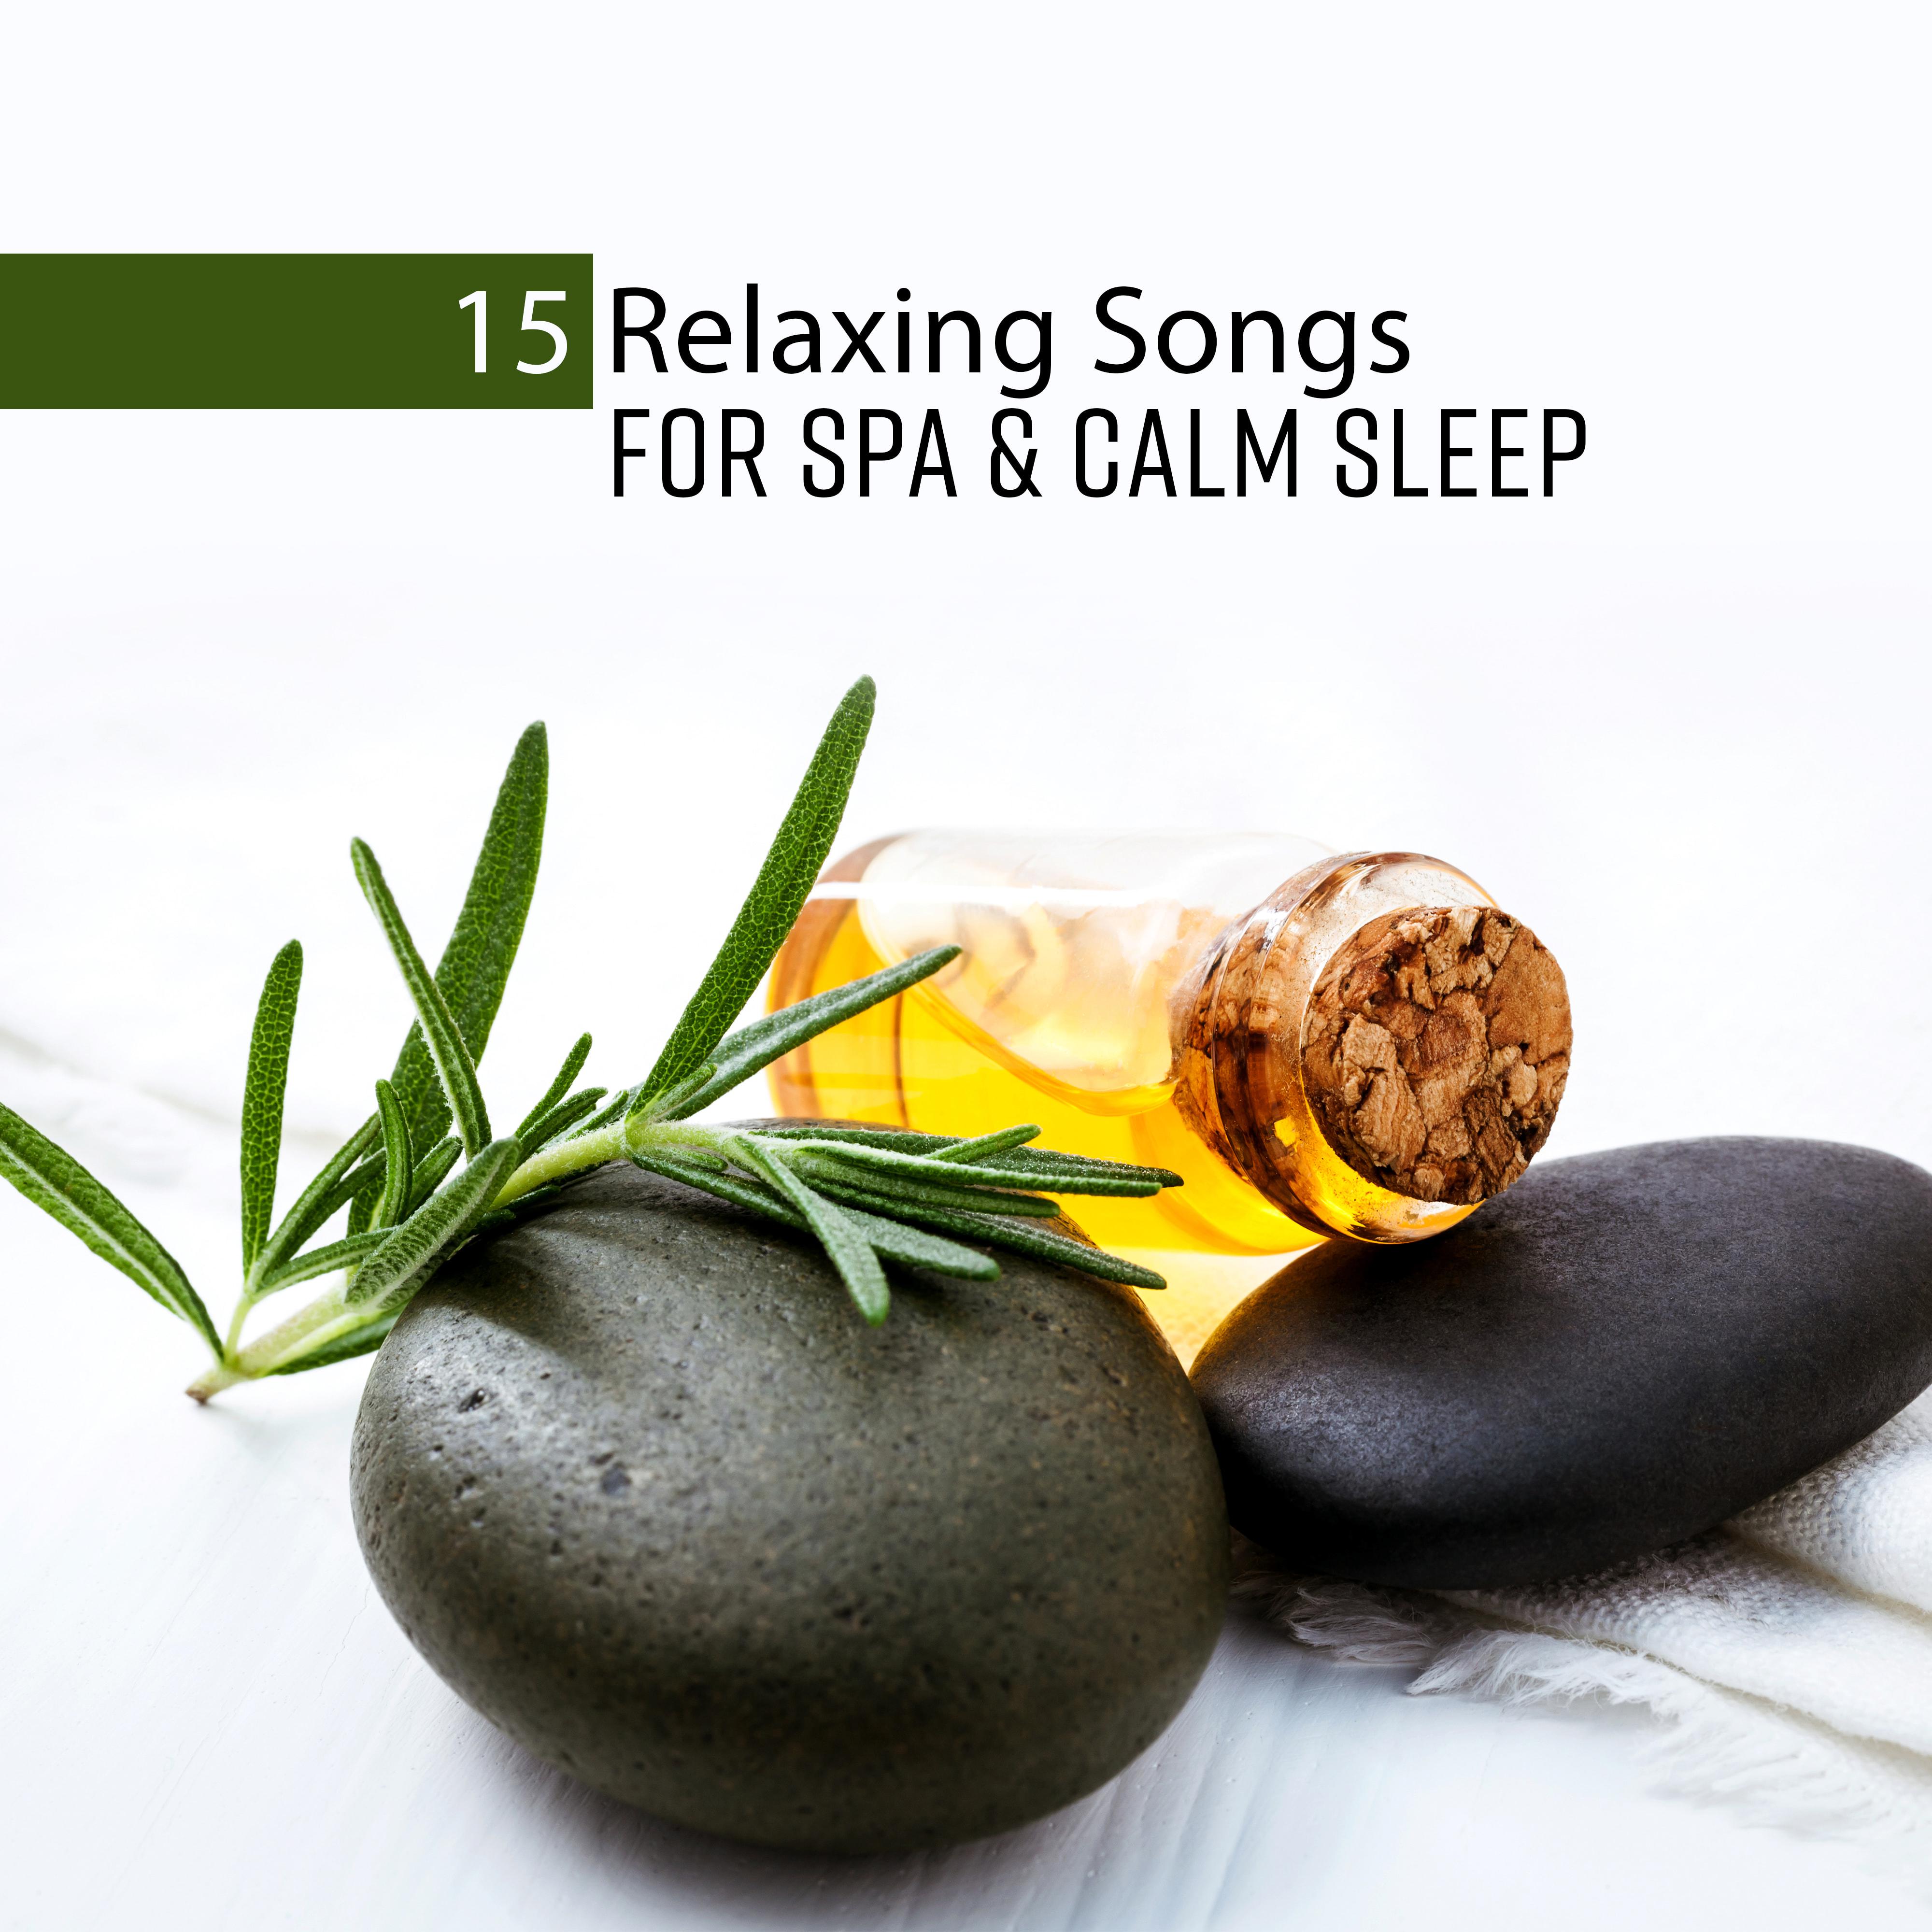 15 Relaxing Songs for Spa & Calm Sleep